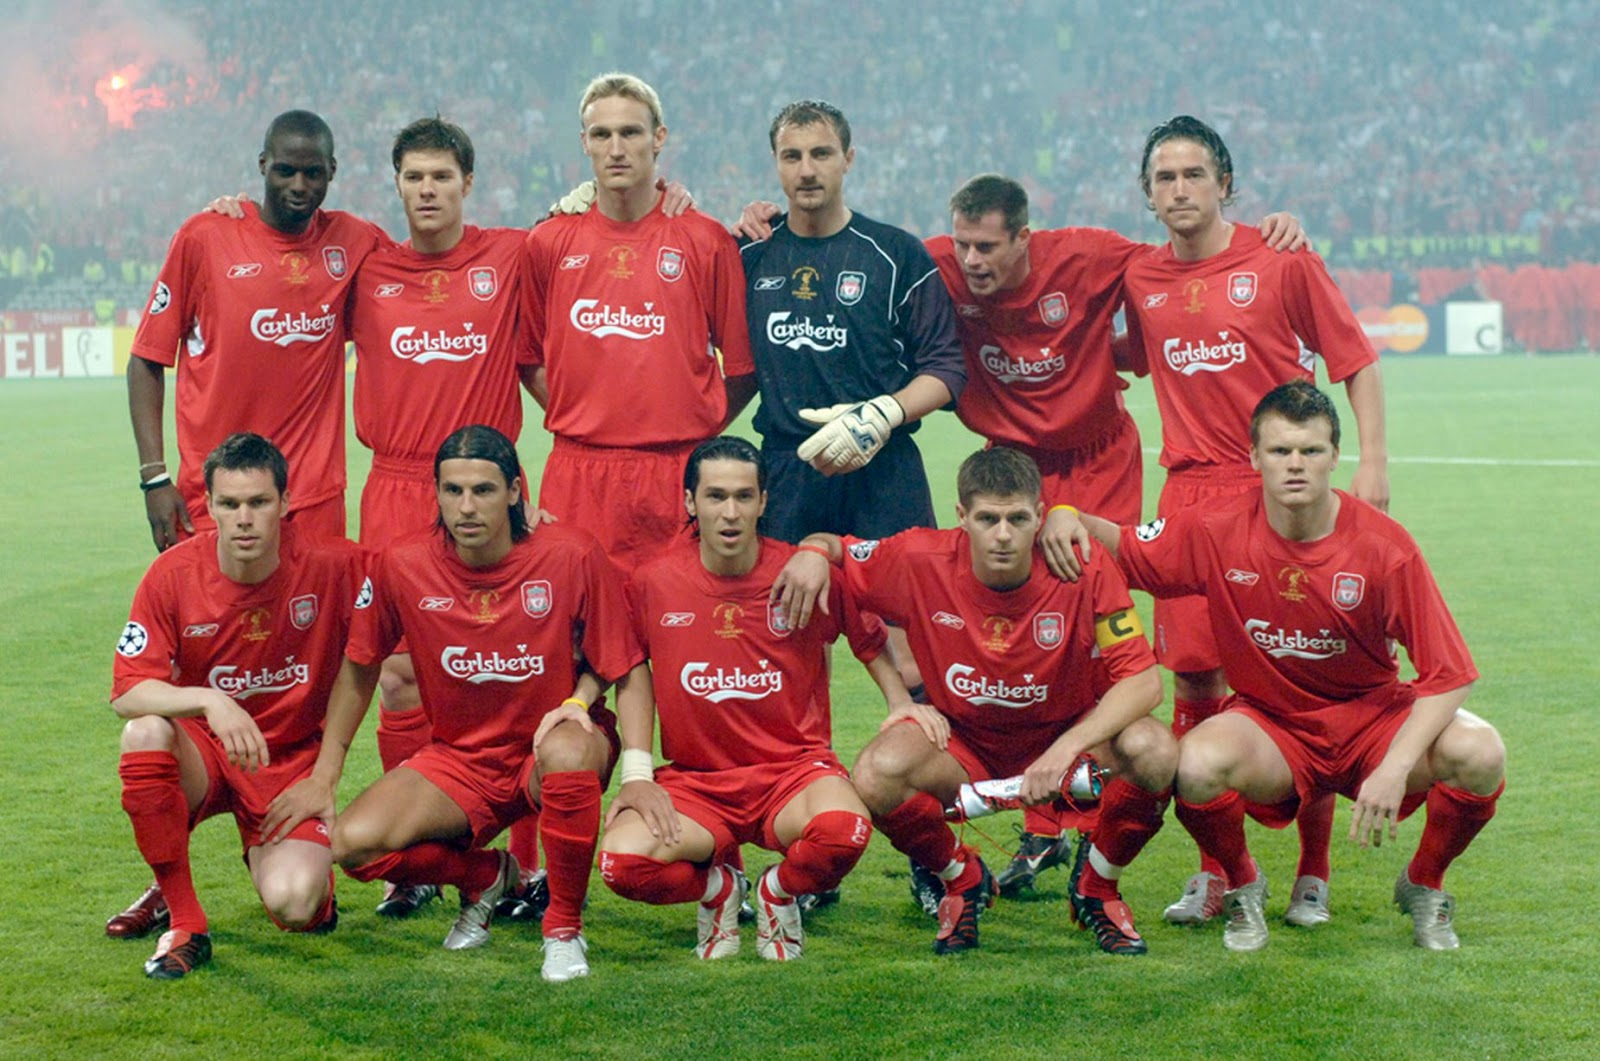 ac milan line up vs liverpool 2005 Liverpool's predicted lineup against ac milan